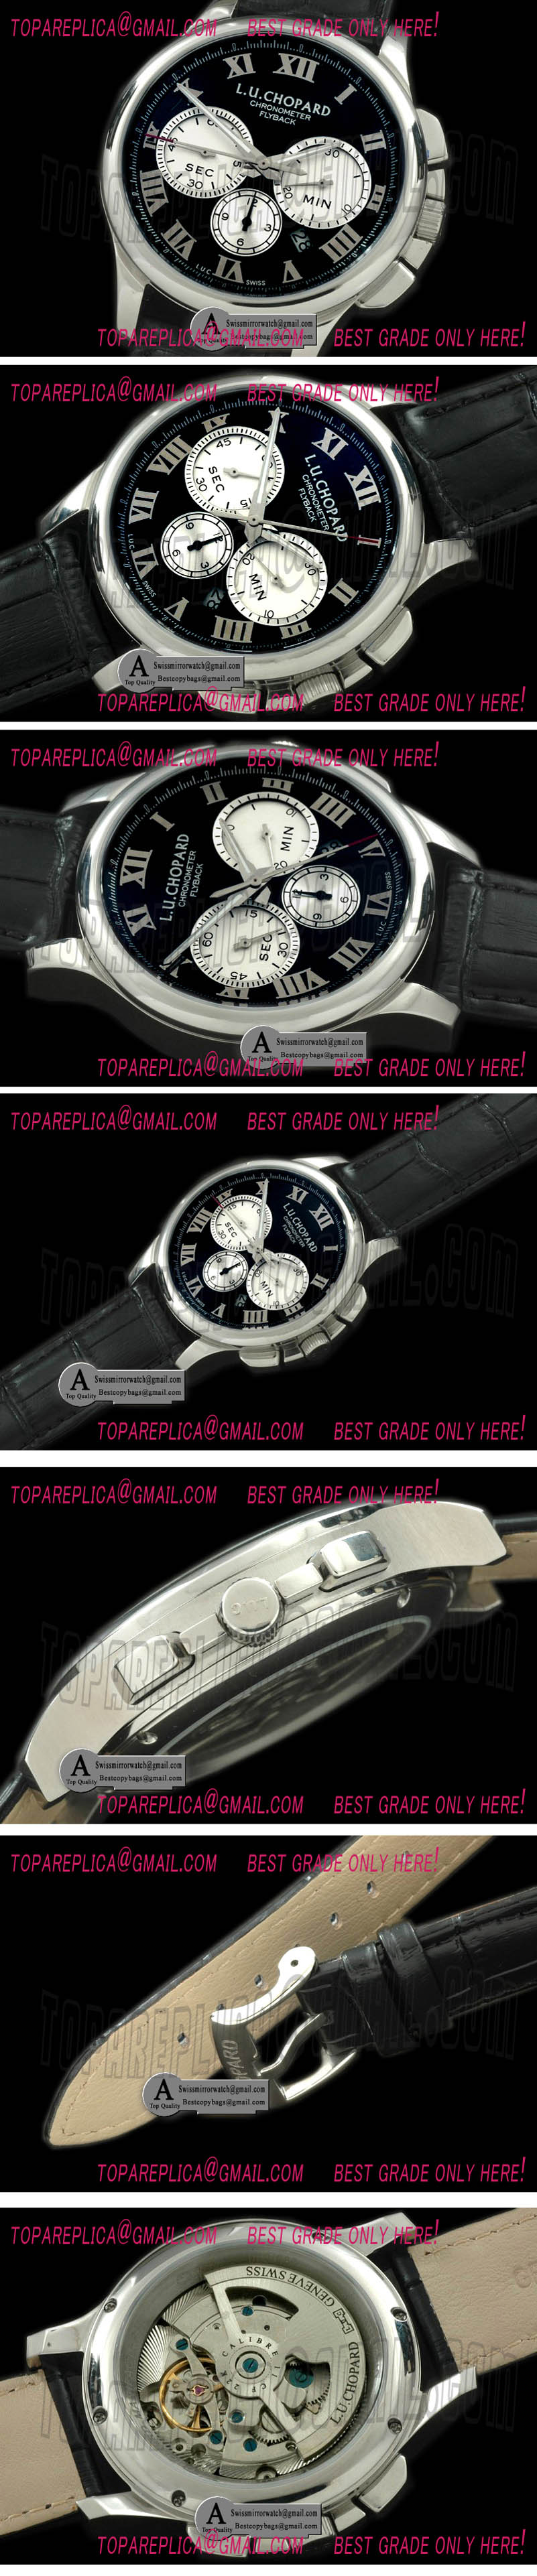 Chopard LUC Chronograph SS/Leather Black Asia 2813 Replica Watches